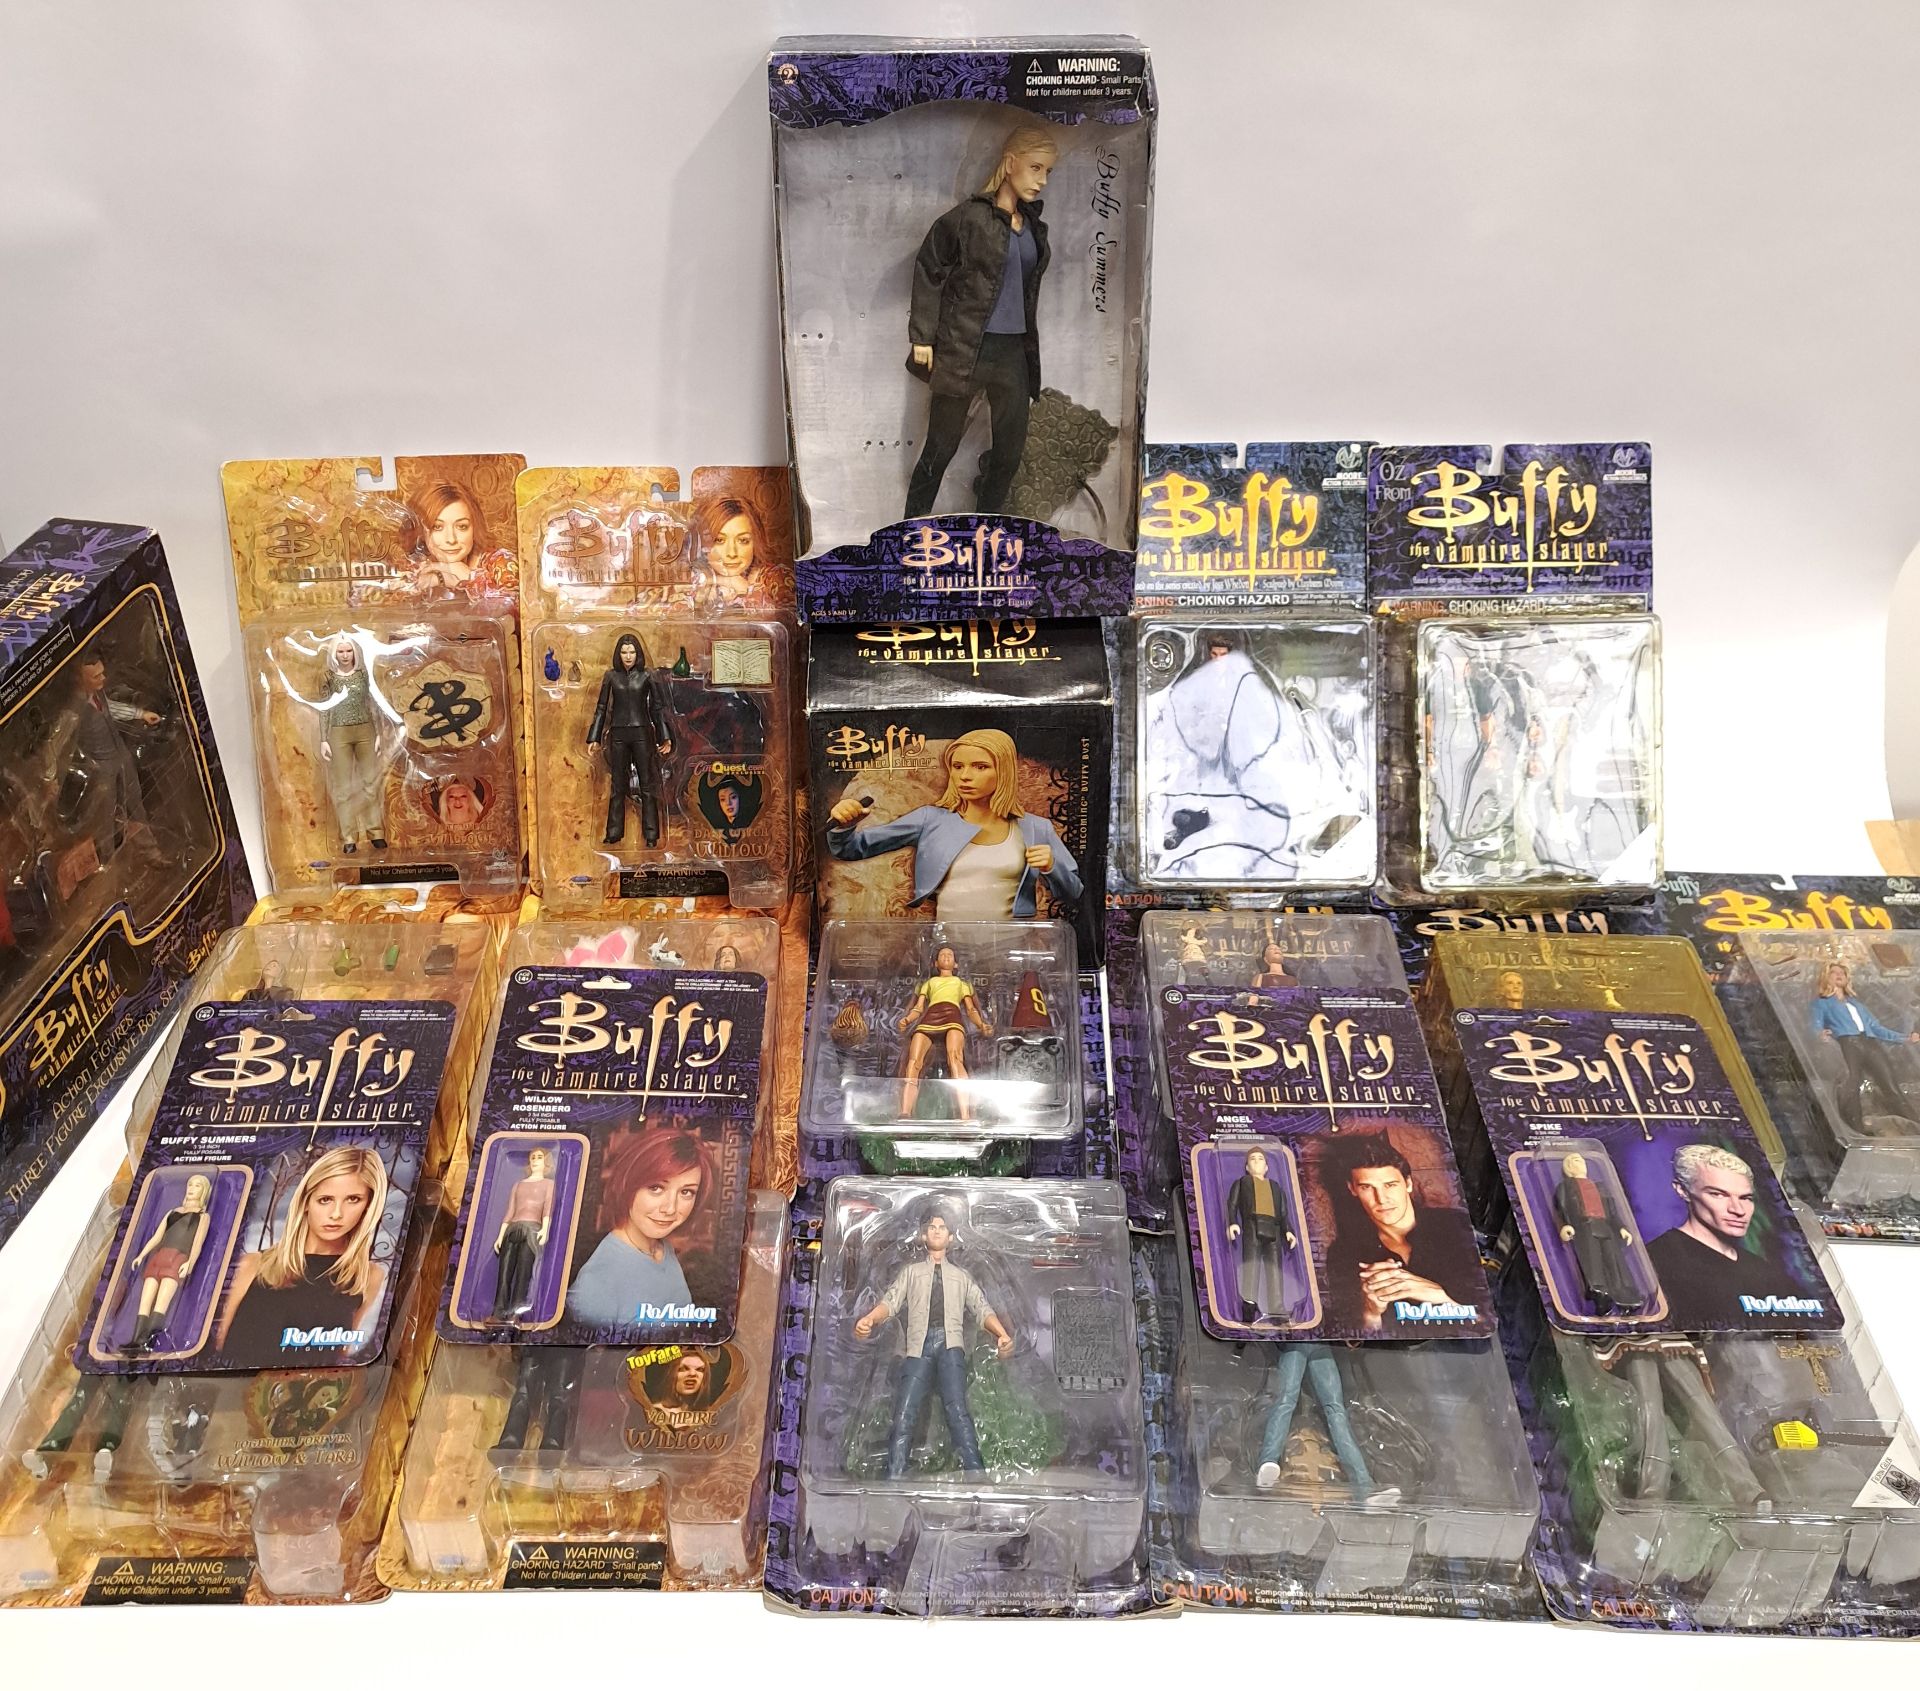 Quantity of Buffy the Vampire Slayer Collectibles